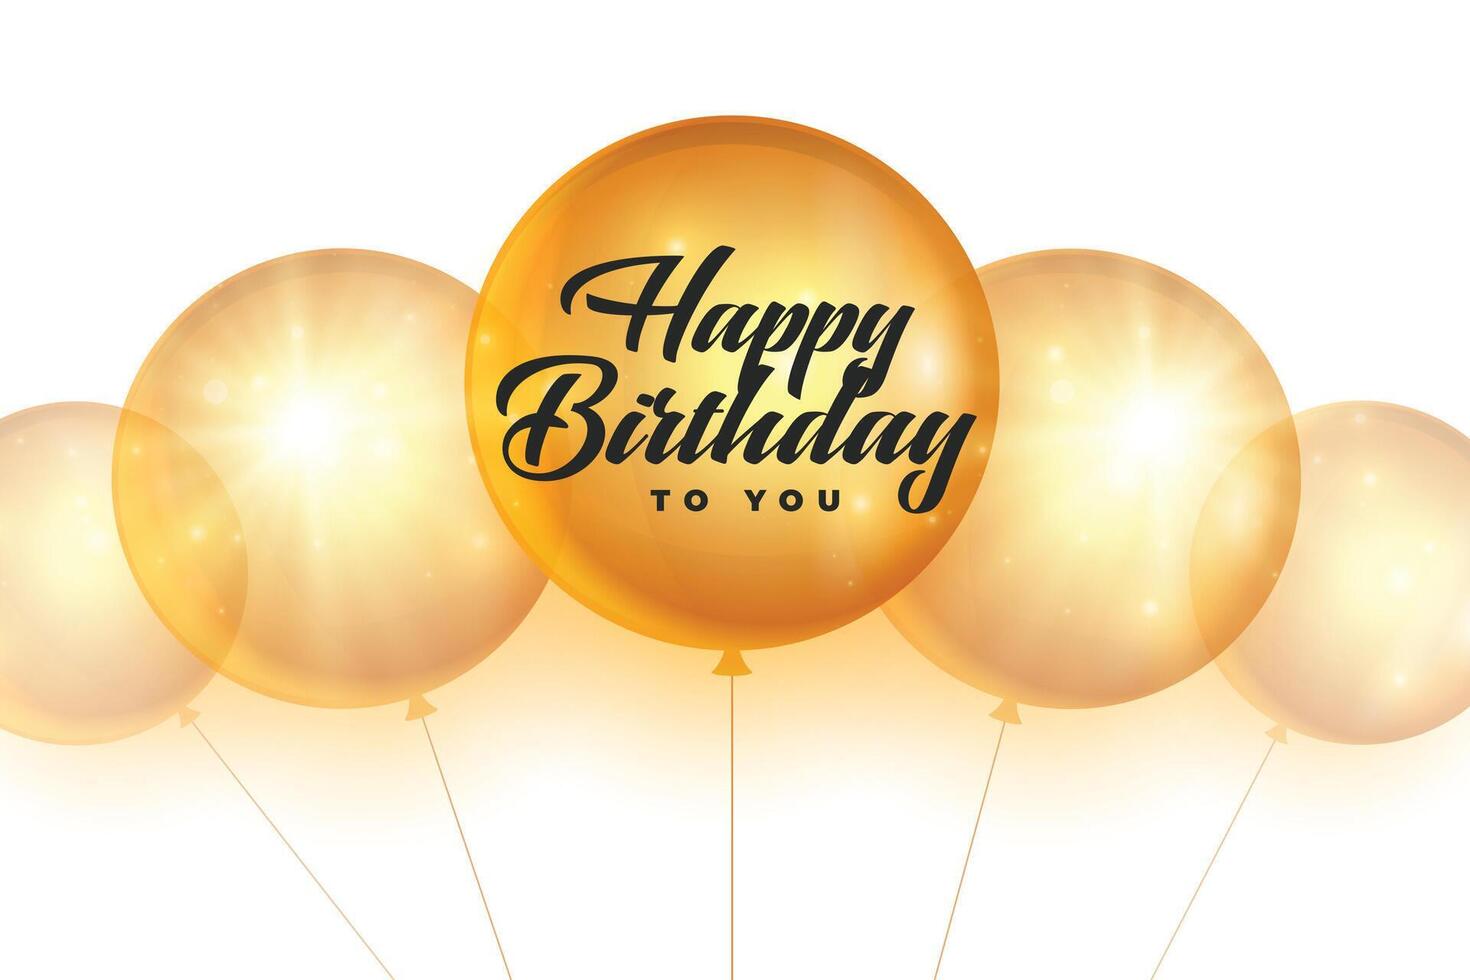 happy birthday card with golden balloons vector